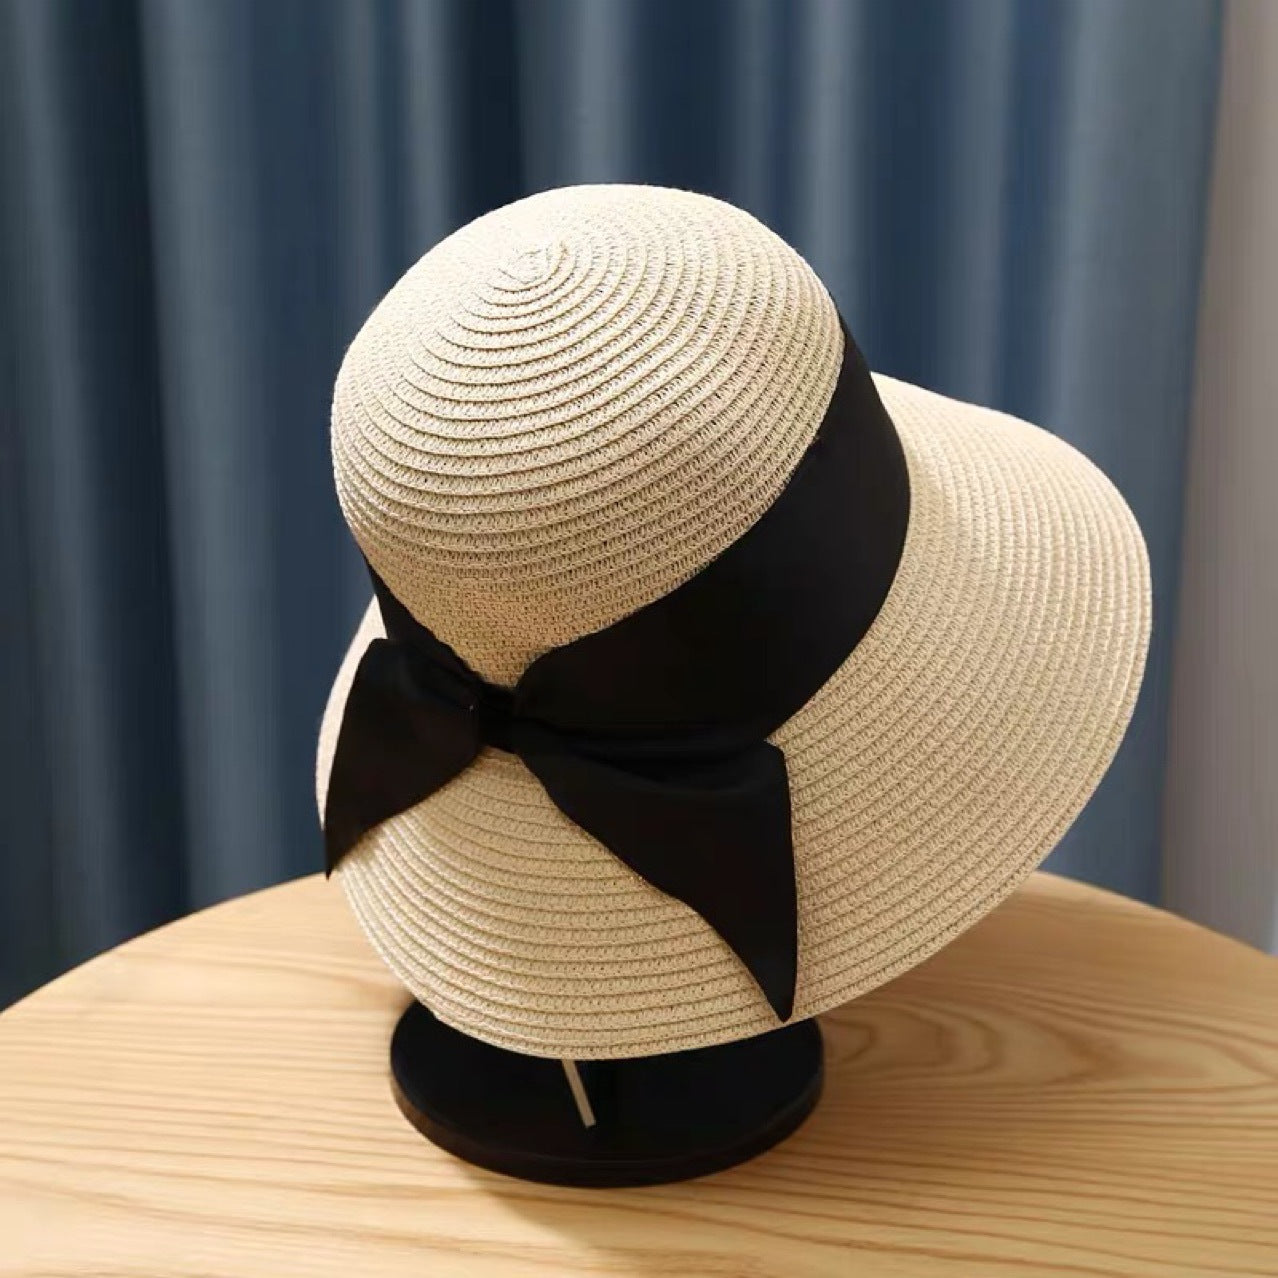 A Straw Hat Foldable Beach Sunshade with a black bow on top by Beachy Cover Ups.